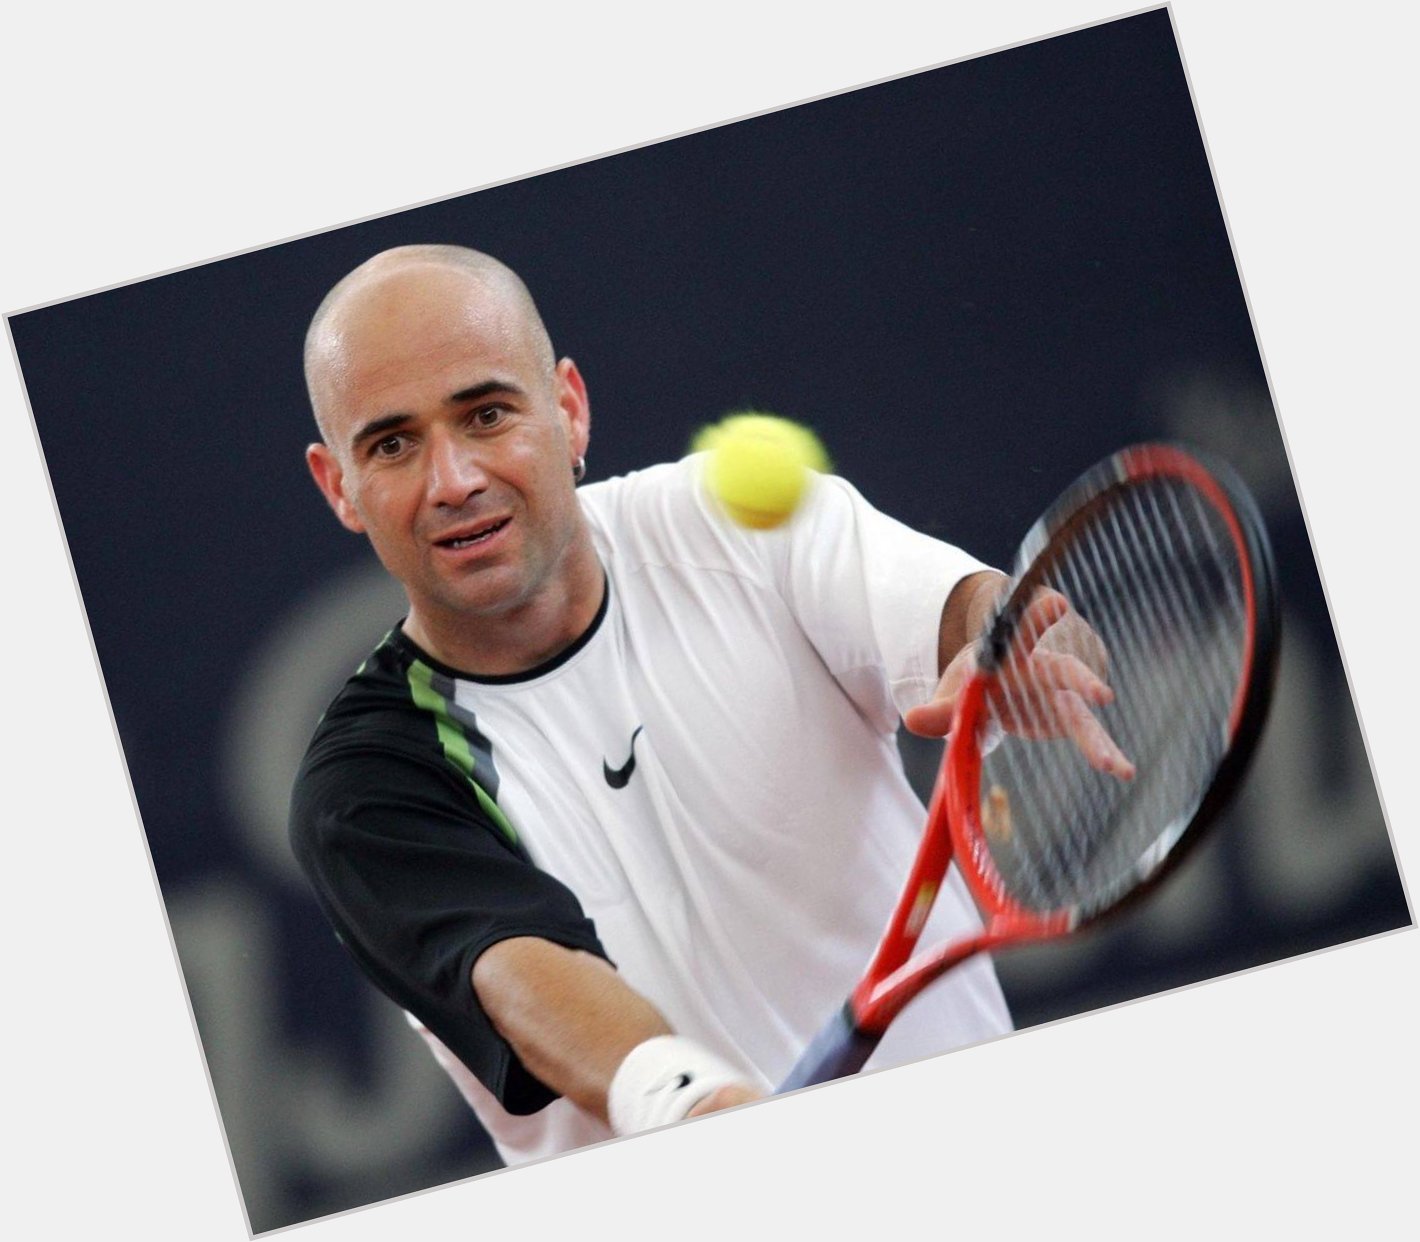 Happy Birthday to Andre Agassi who turns 49 today! 